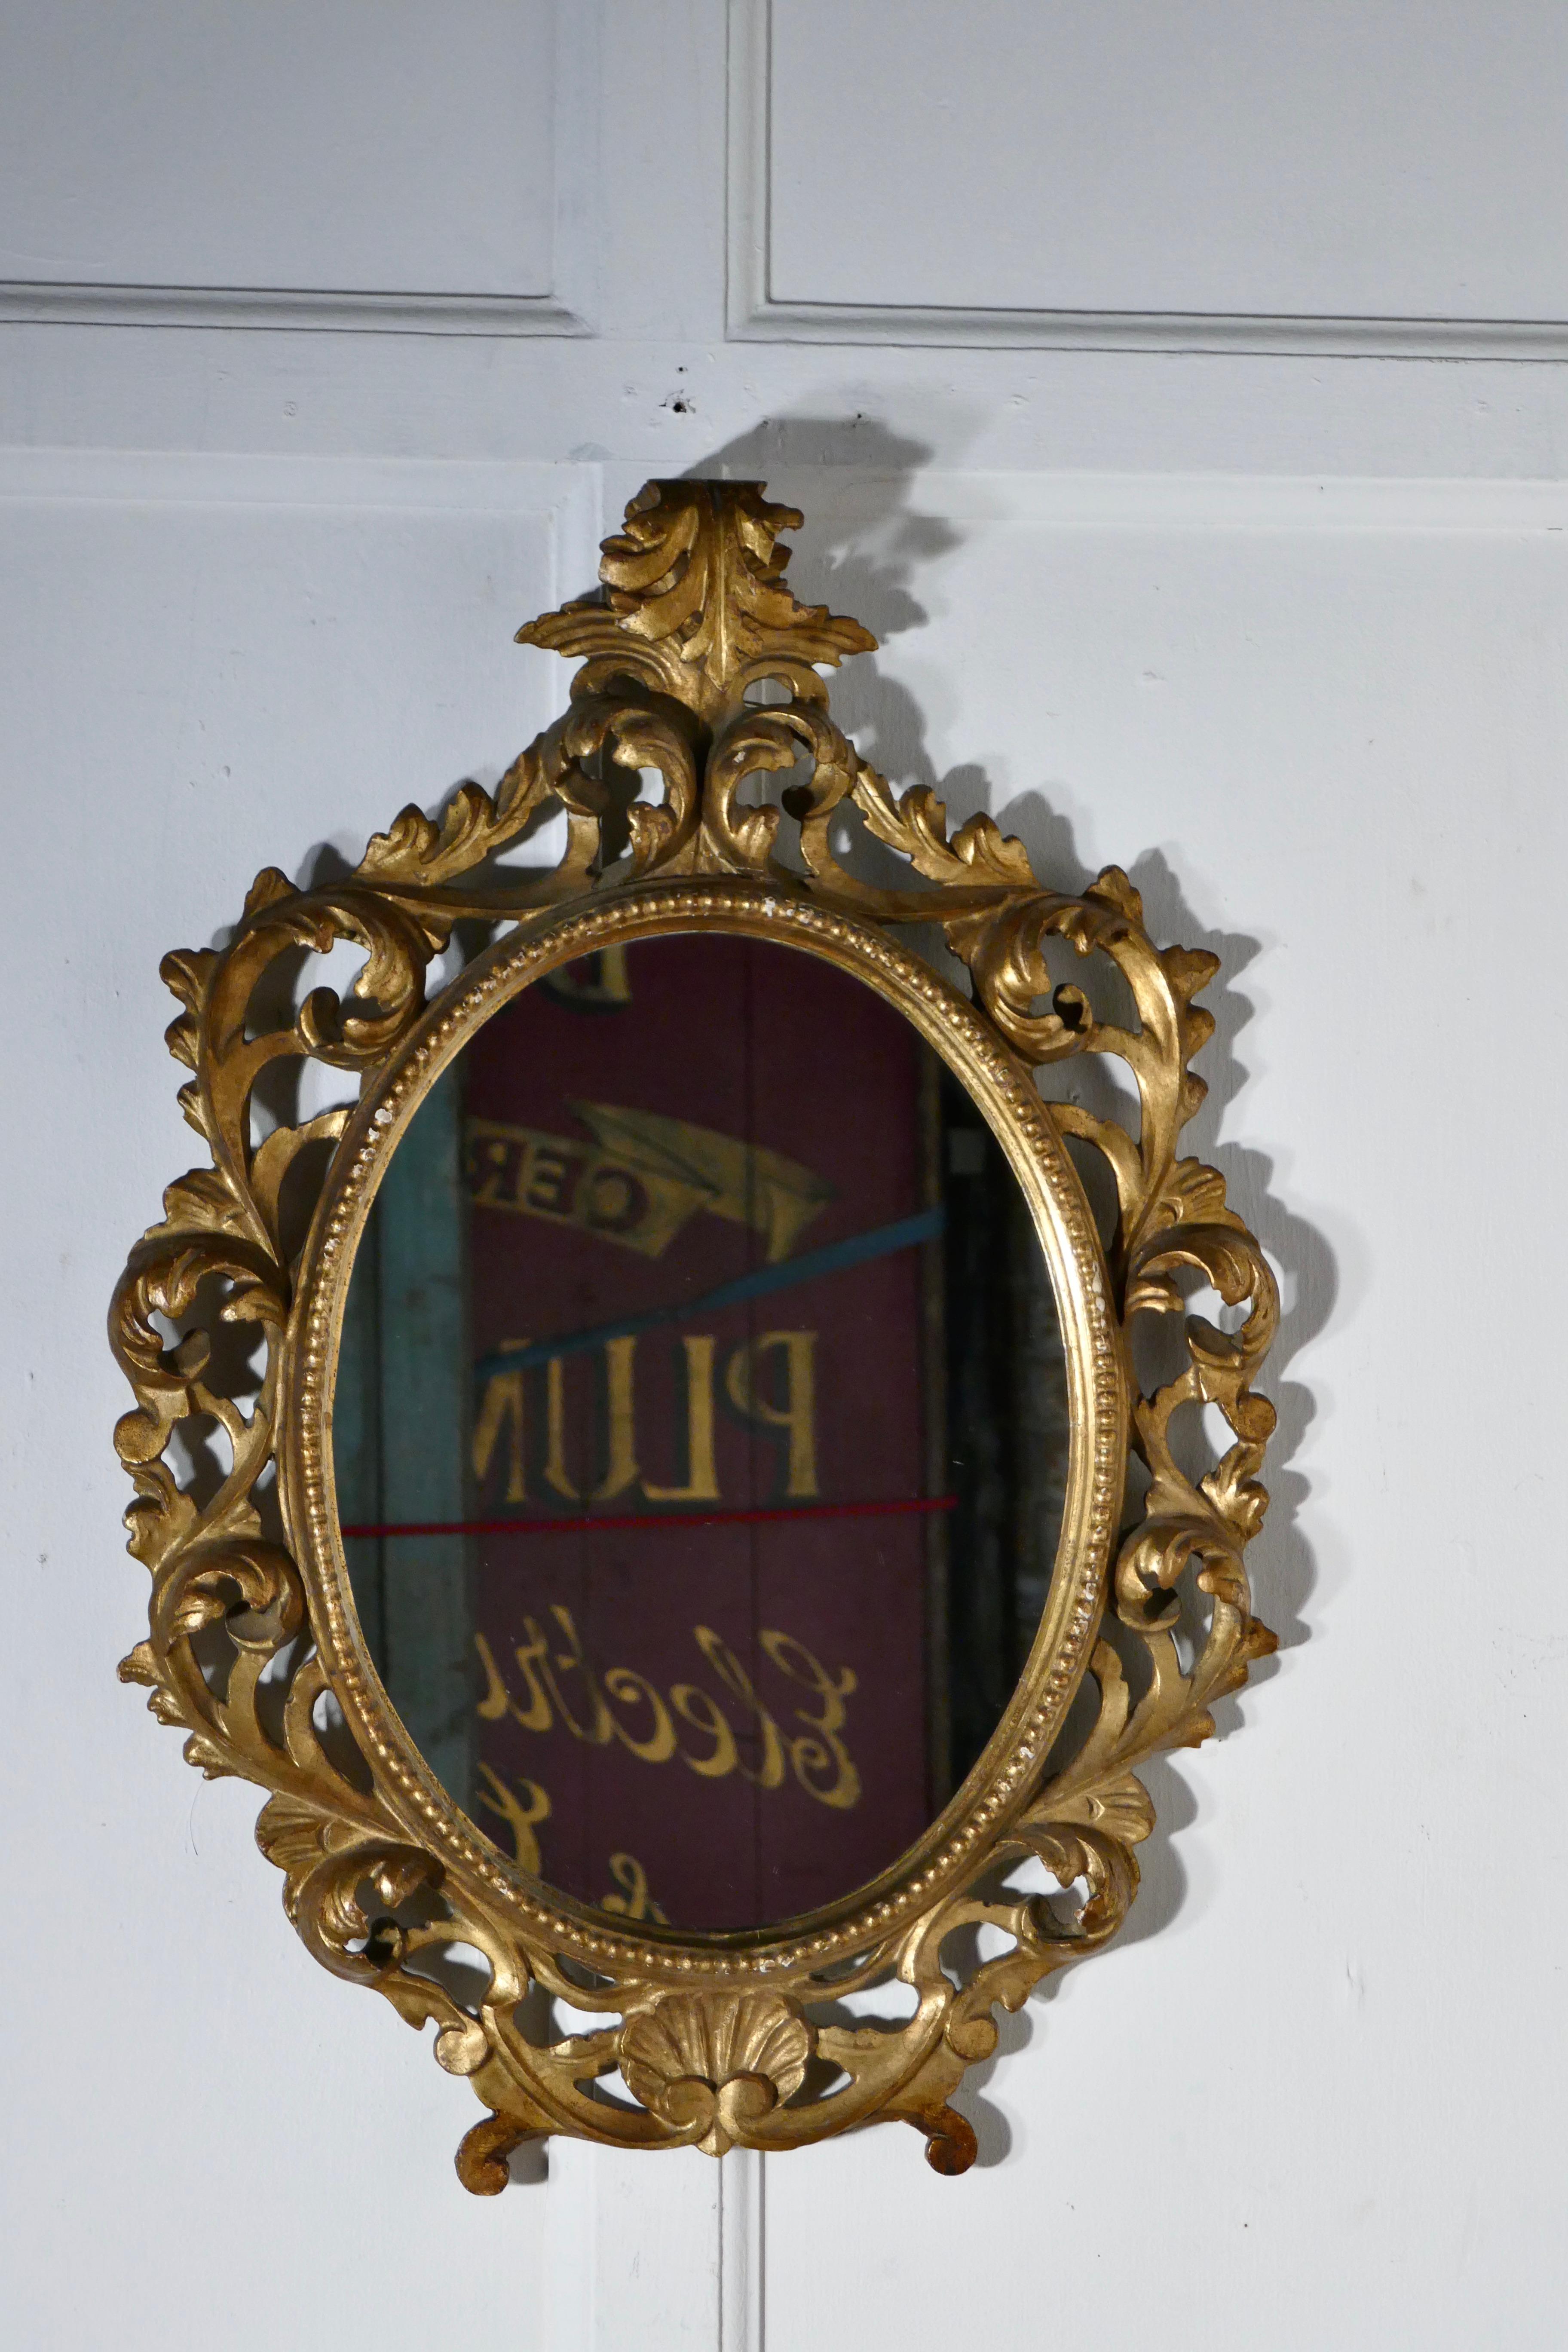 19th century French Rococo gilt wall mirror 

This is a beautifully Decorative Rococo gold frame mirror it is a very pretty shape with heavy gilded deep carving
The frame is intricately carved in 3D with scrolls and curling leaves, the gilt